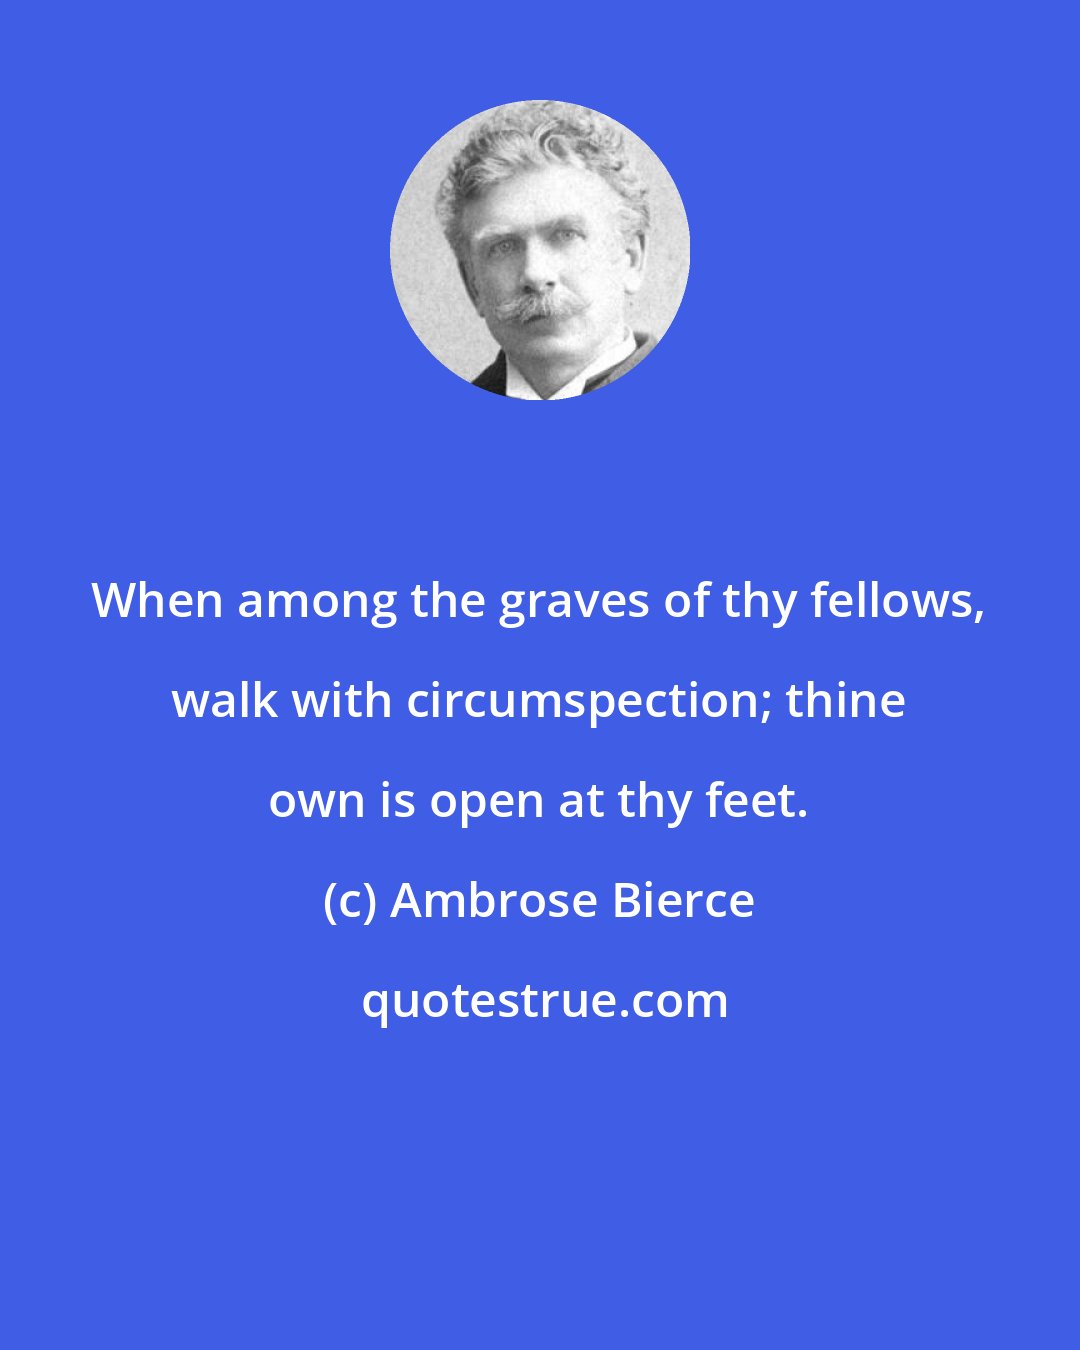 Ambrose Bierce: When among the graves of thy fellows, walk with circumspection; thine own is open at thy feet.